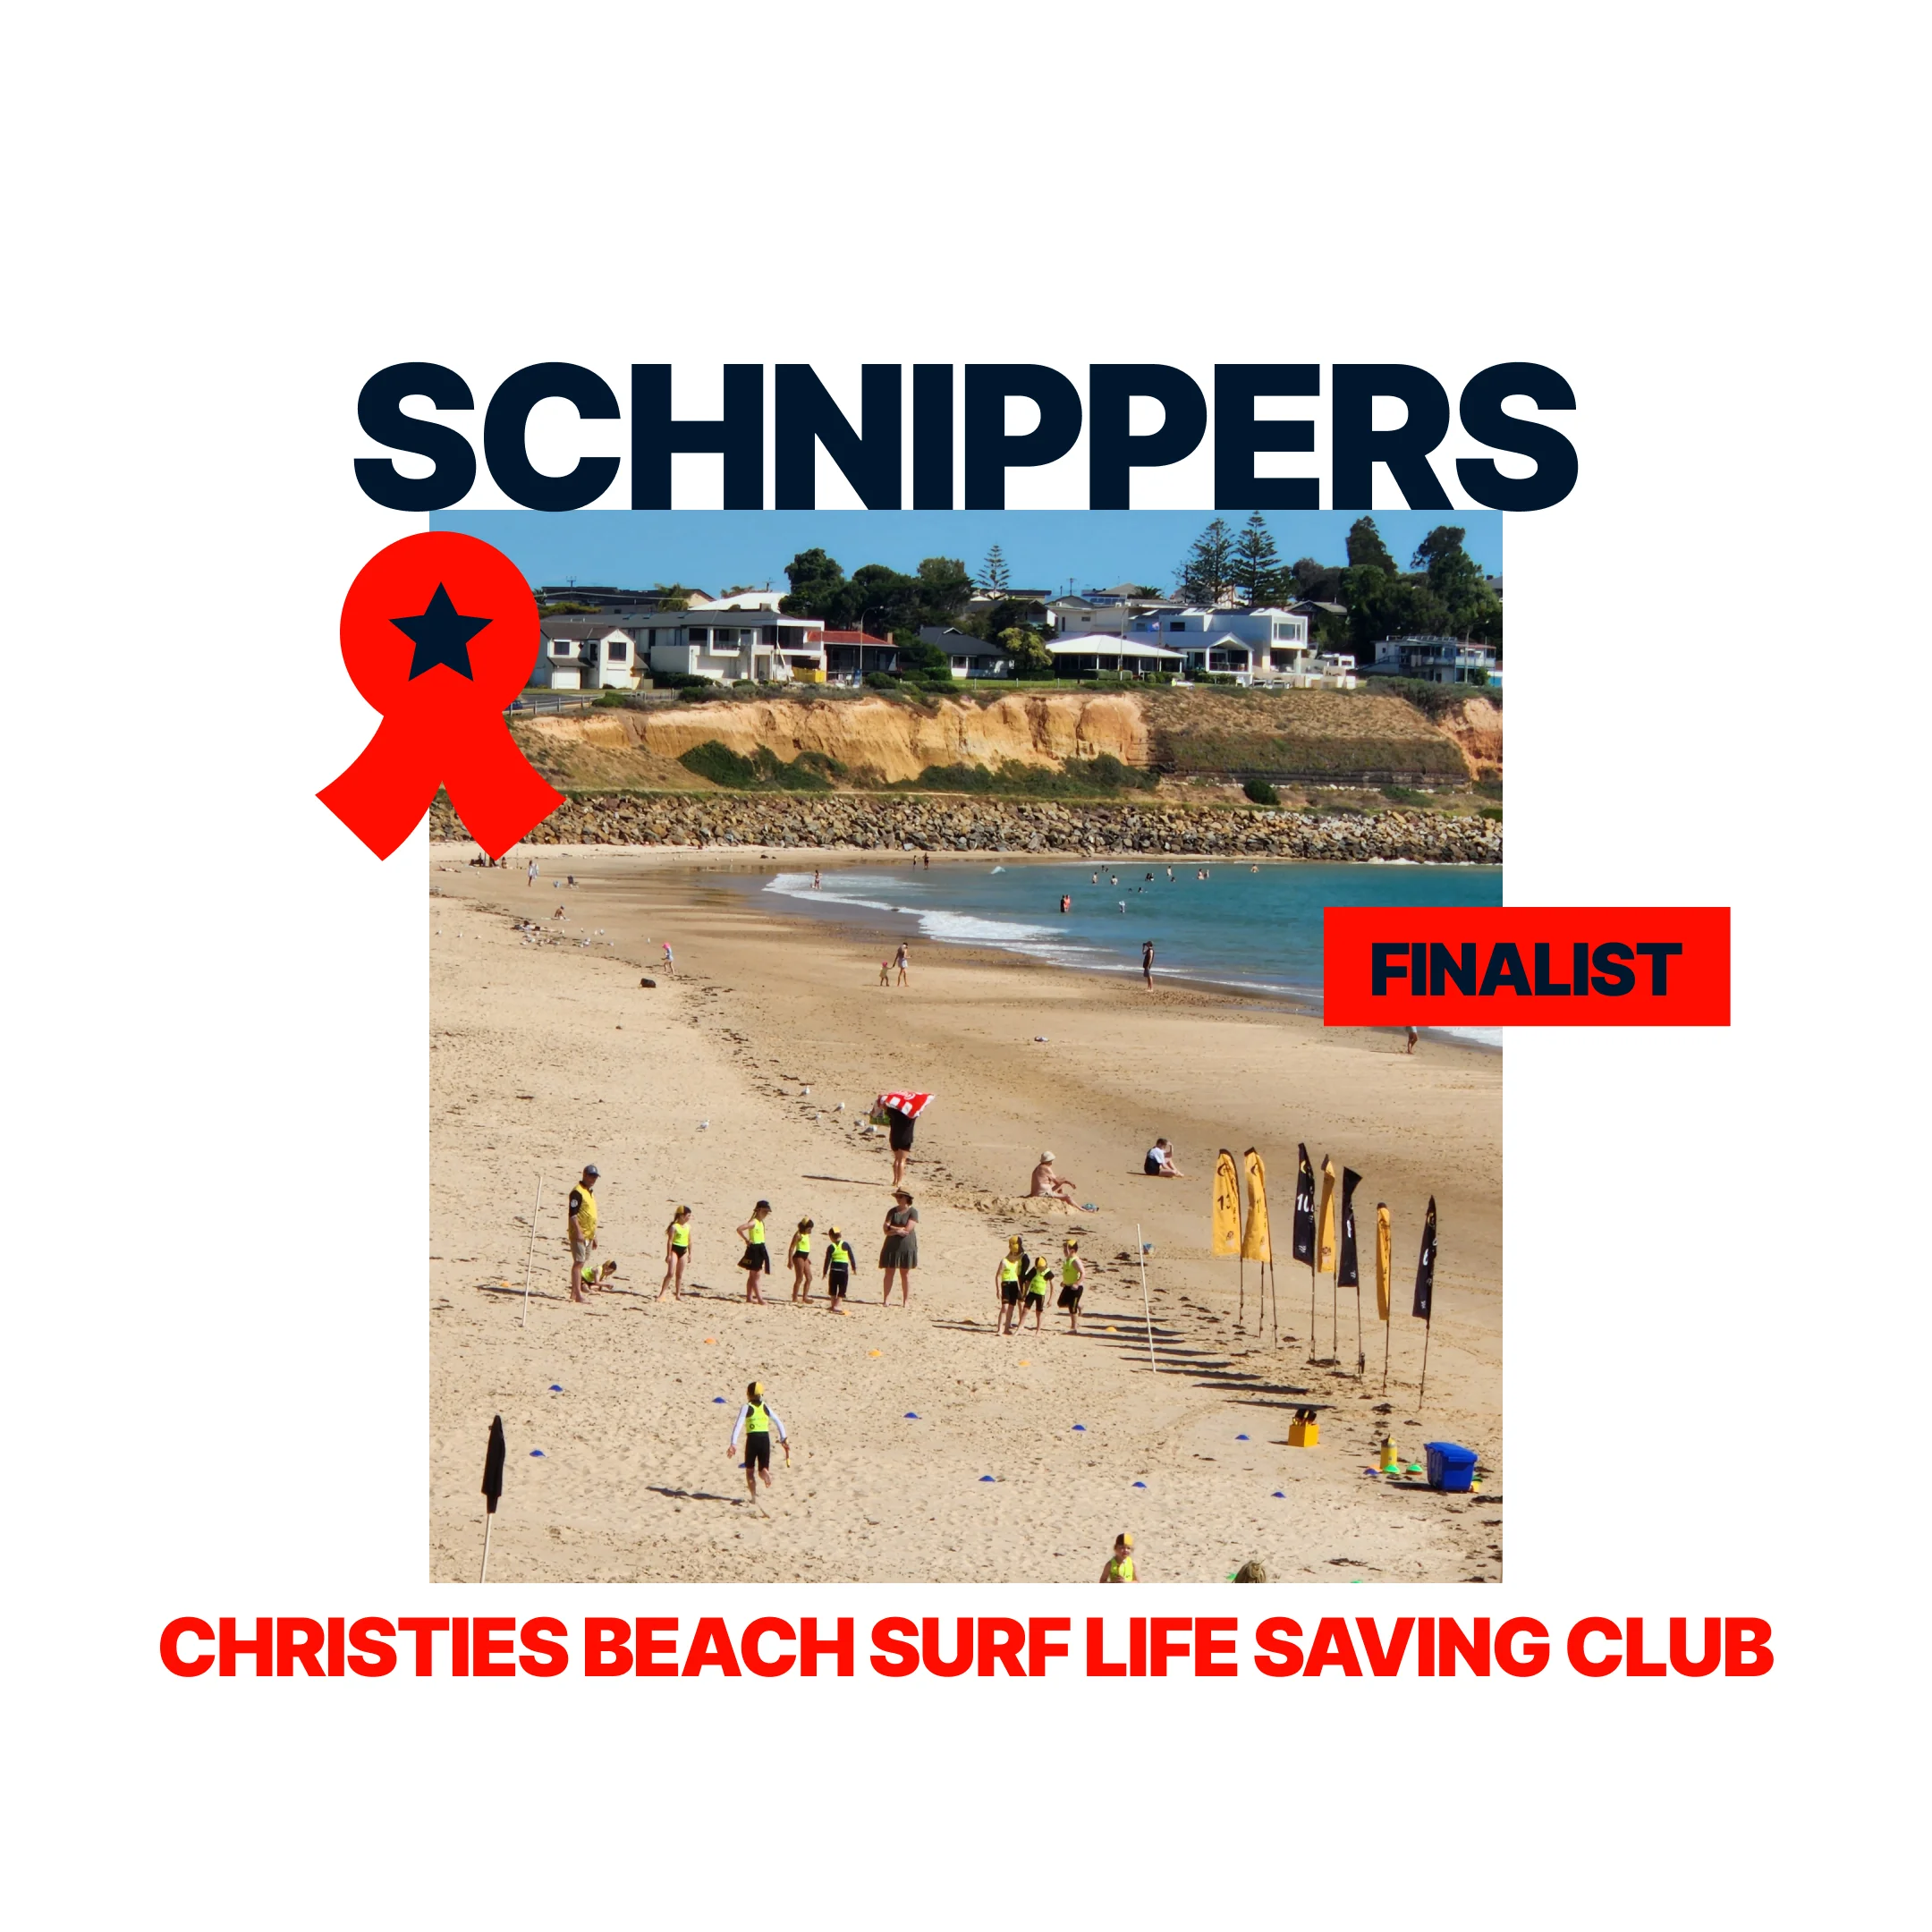 Schnippers, Christies Beach Surf Live Saving Club